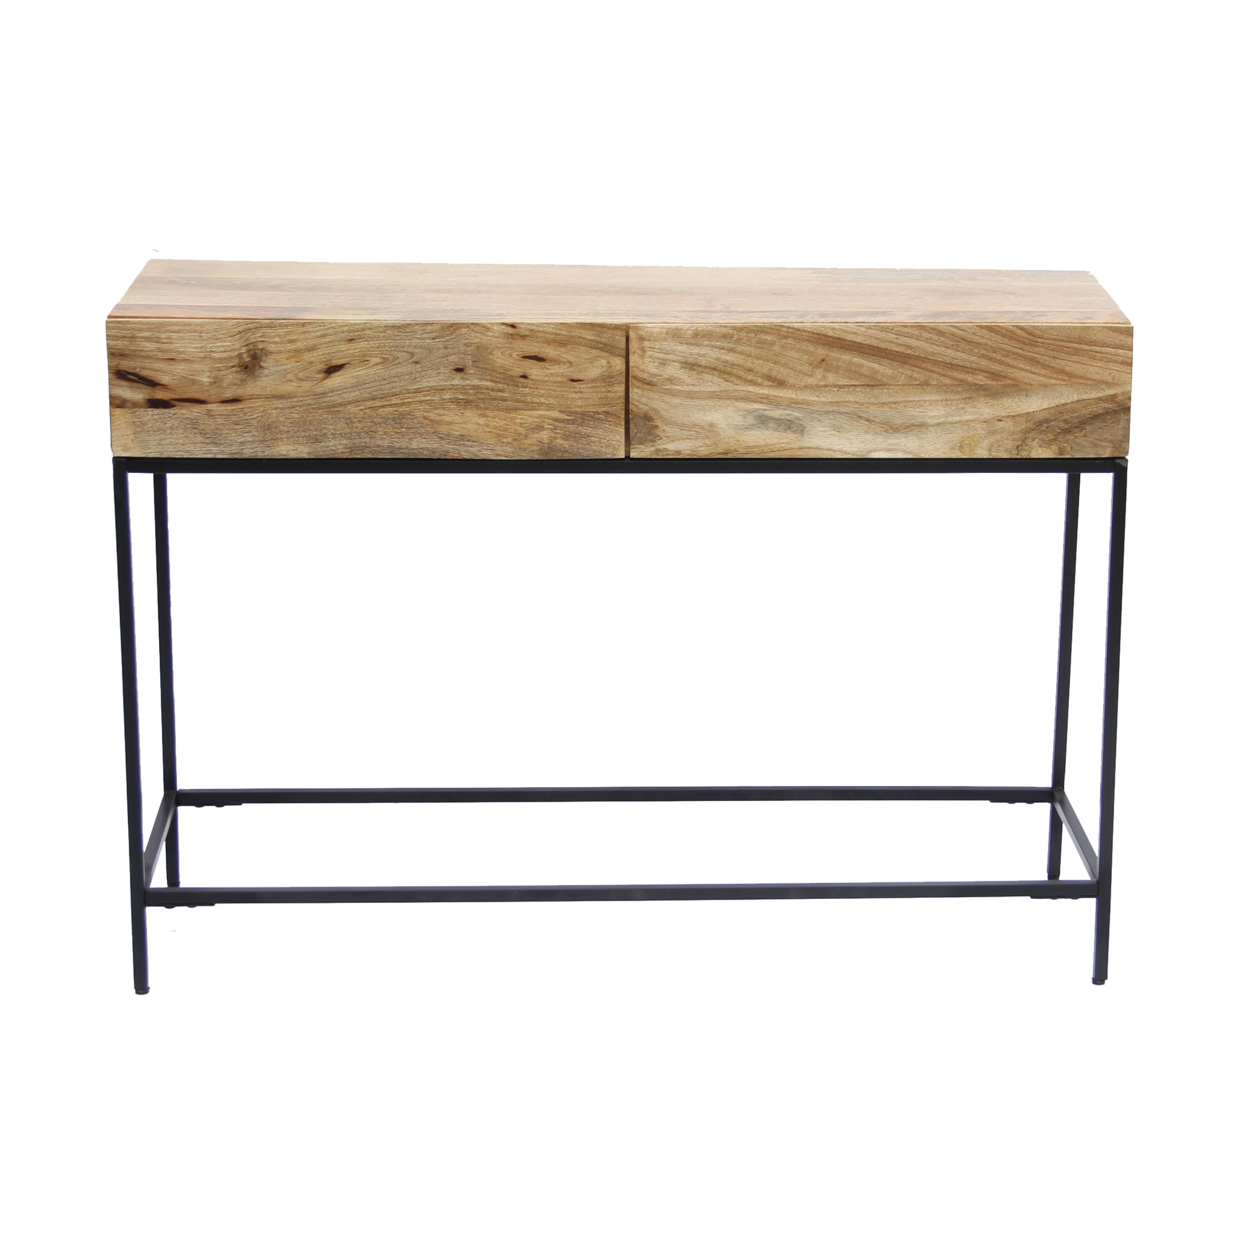 Mango Wood And Metal Console Table With Two Drawers, Brown- Saltoro Sherpi